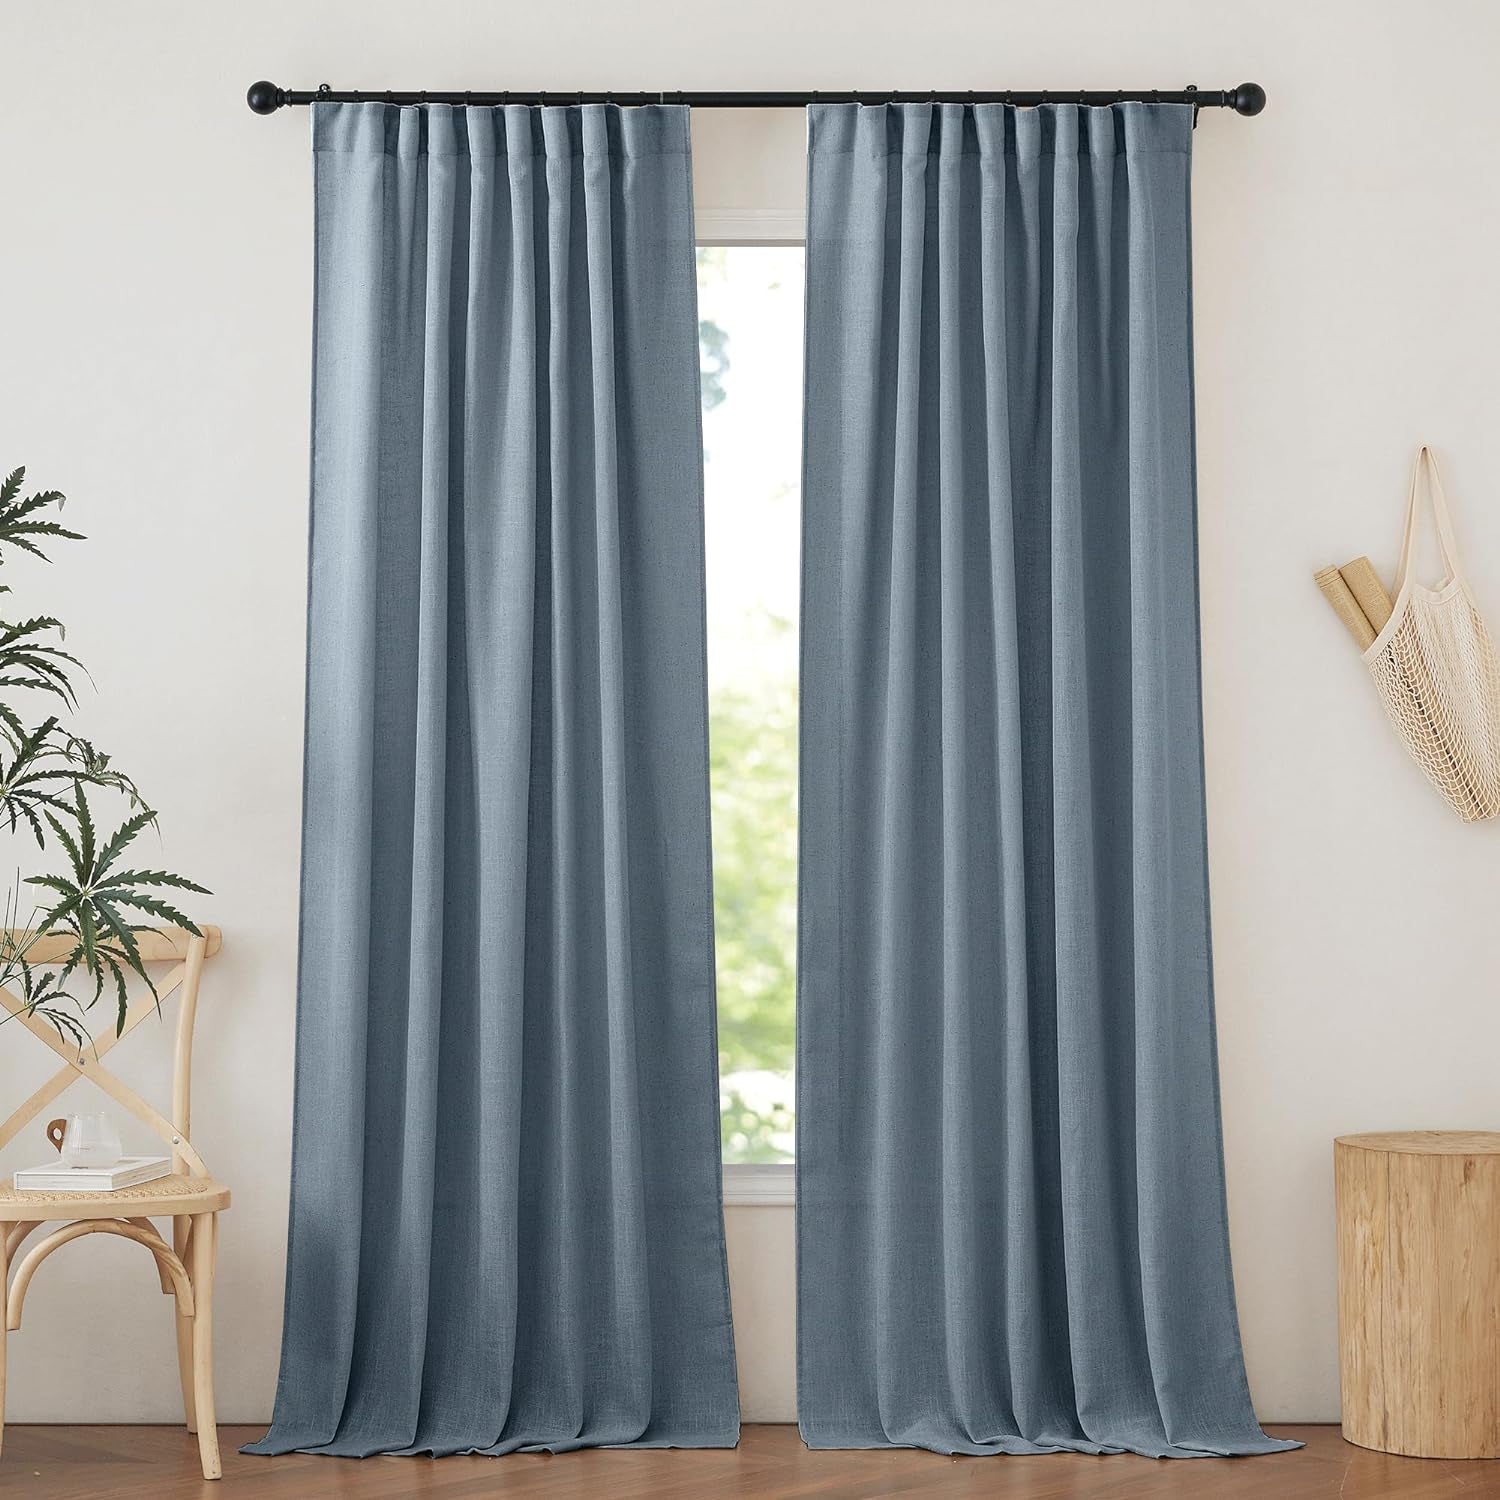 NICETOWN Linen Textured Curtain for Bedroom/Living Room Thermal Insulated Back Tab Linen Look Curtain Drapes Soft Rich Material Light Reducing Drape Panels for Window, 2 Panels, 52 X 84 Inch, Linen  NICETOWN Stone Blue W52 X L84 